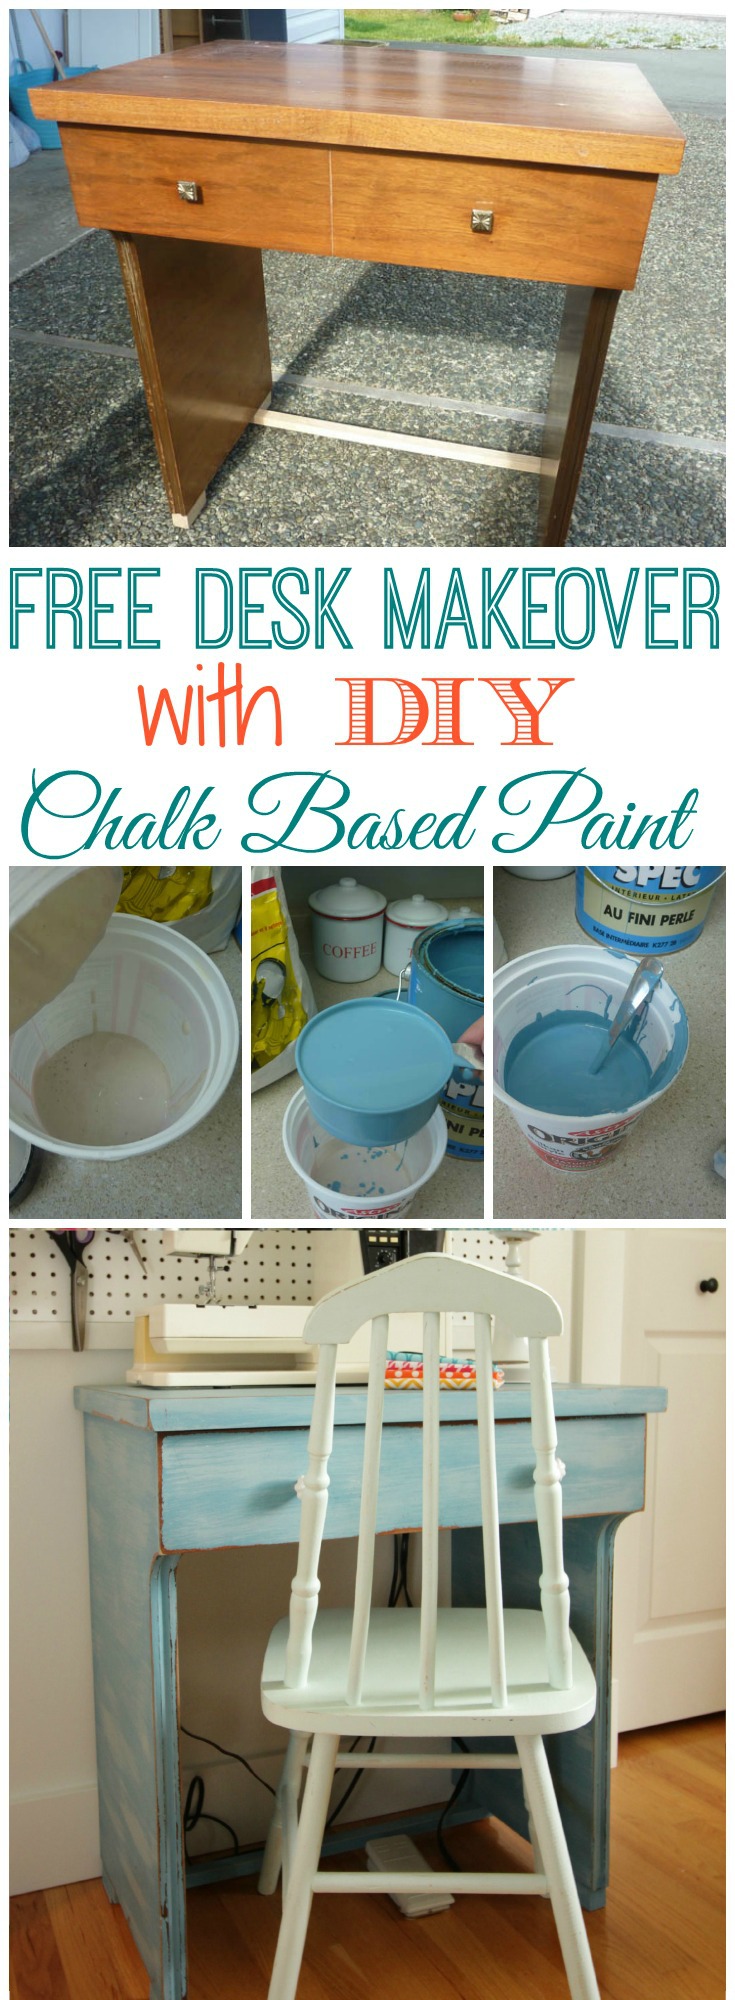 Free Desk Makeover with DIY Chalk Based Paint at thehappyhousie.com